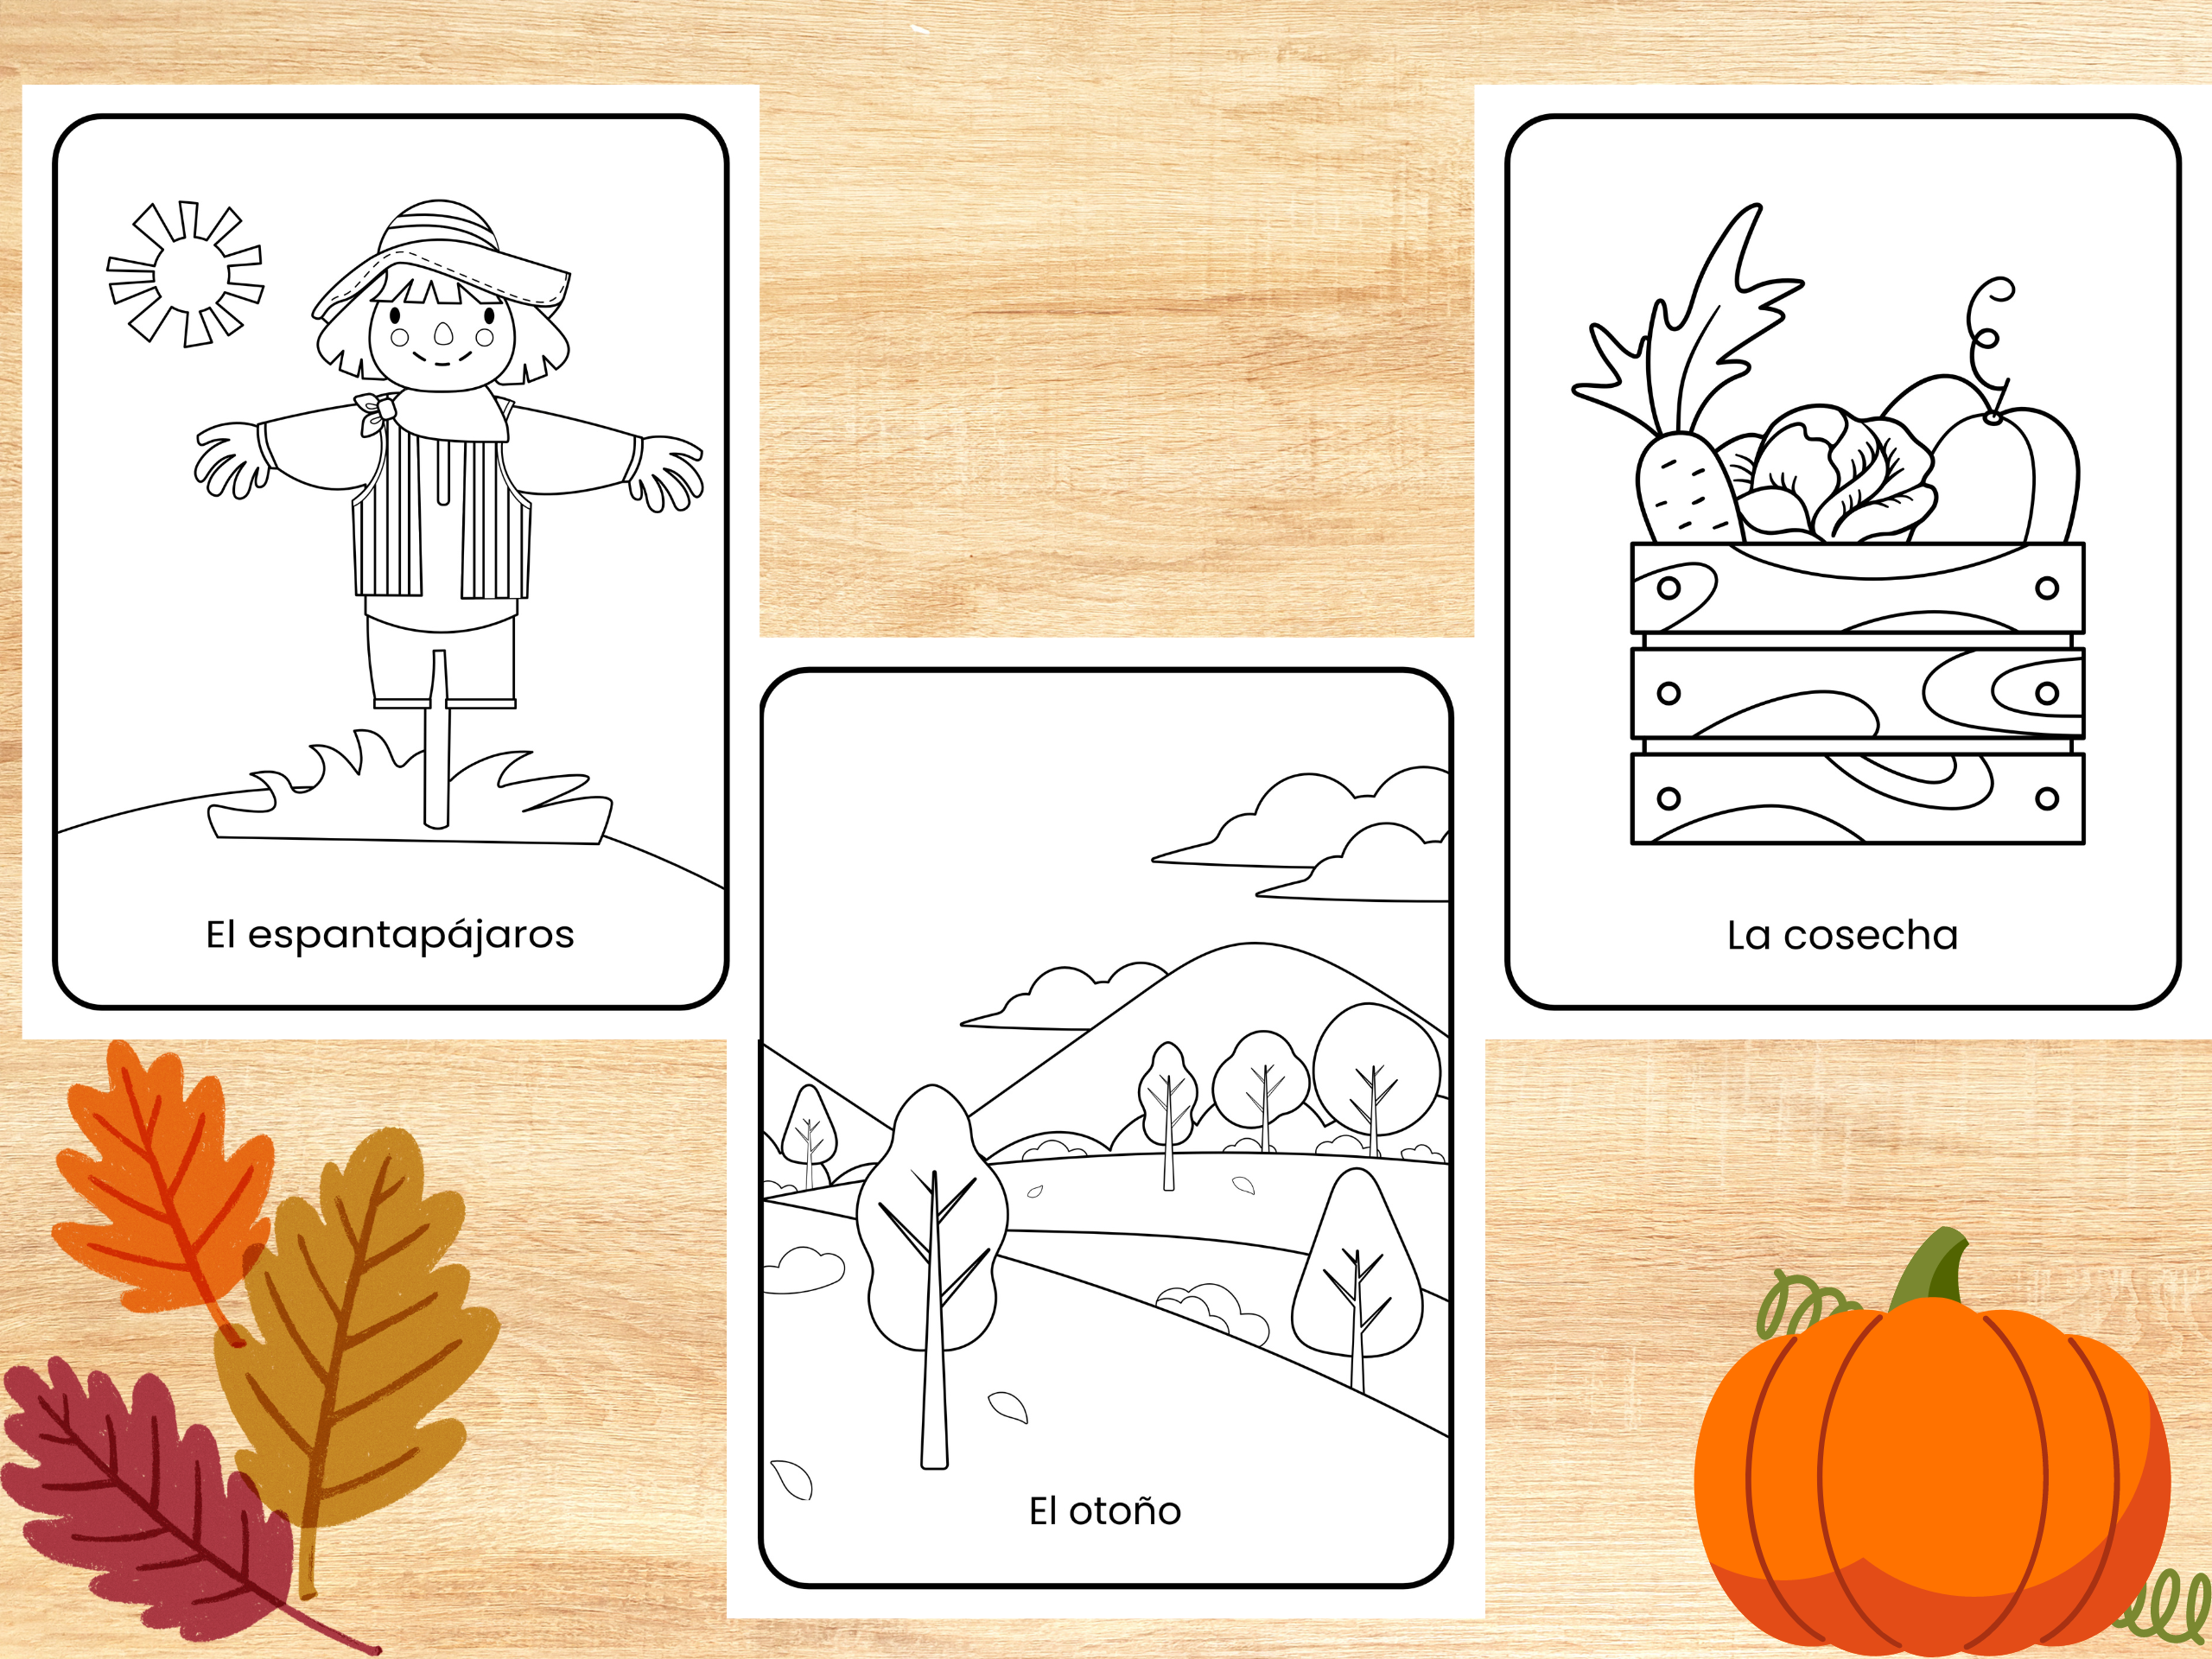 Dive into Spanish with Fall Coloring Pages for Kids